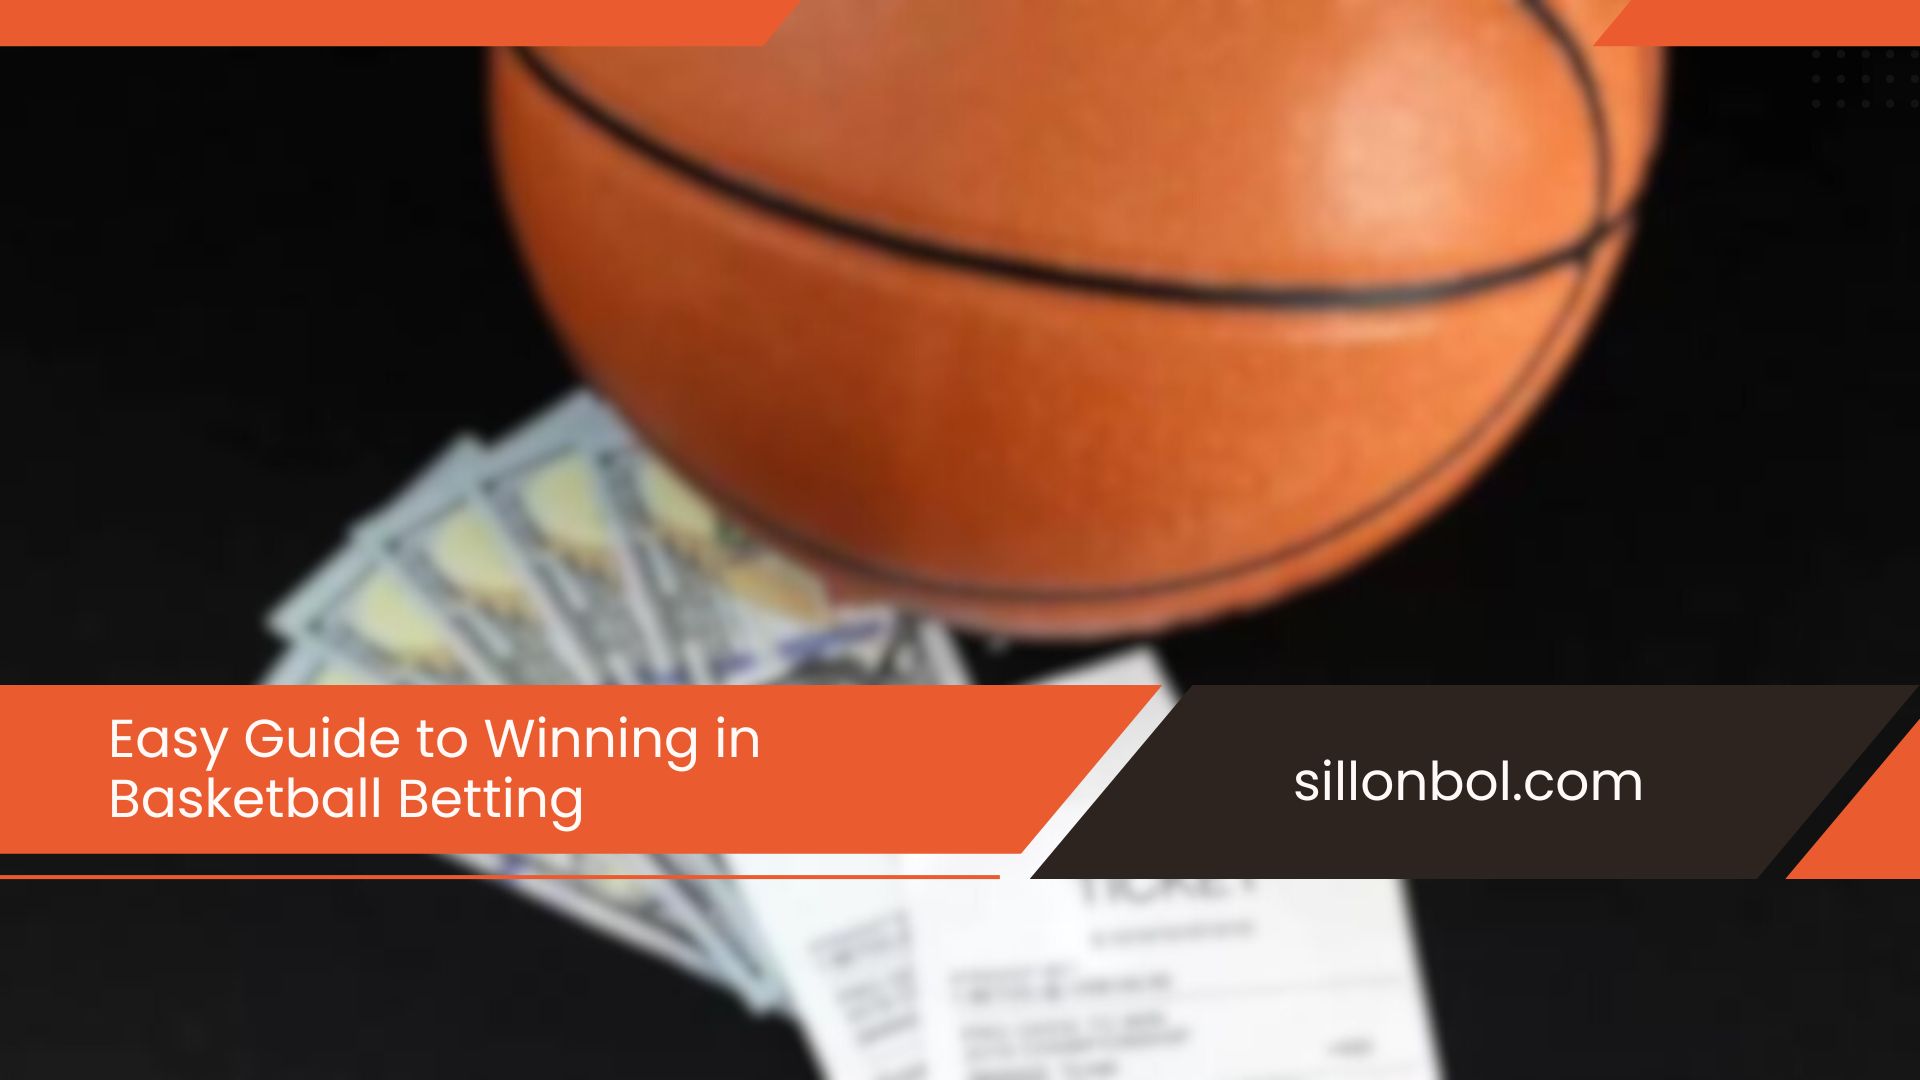 Easy Guide to Winning in Basketball Betting